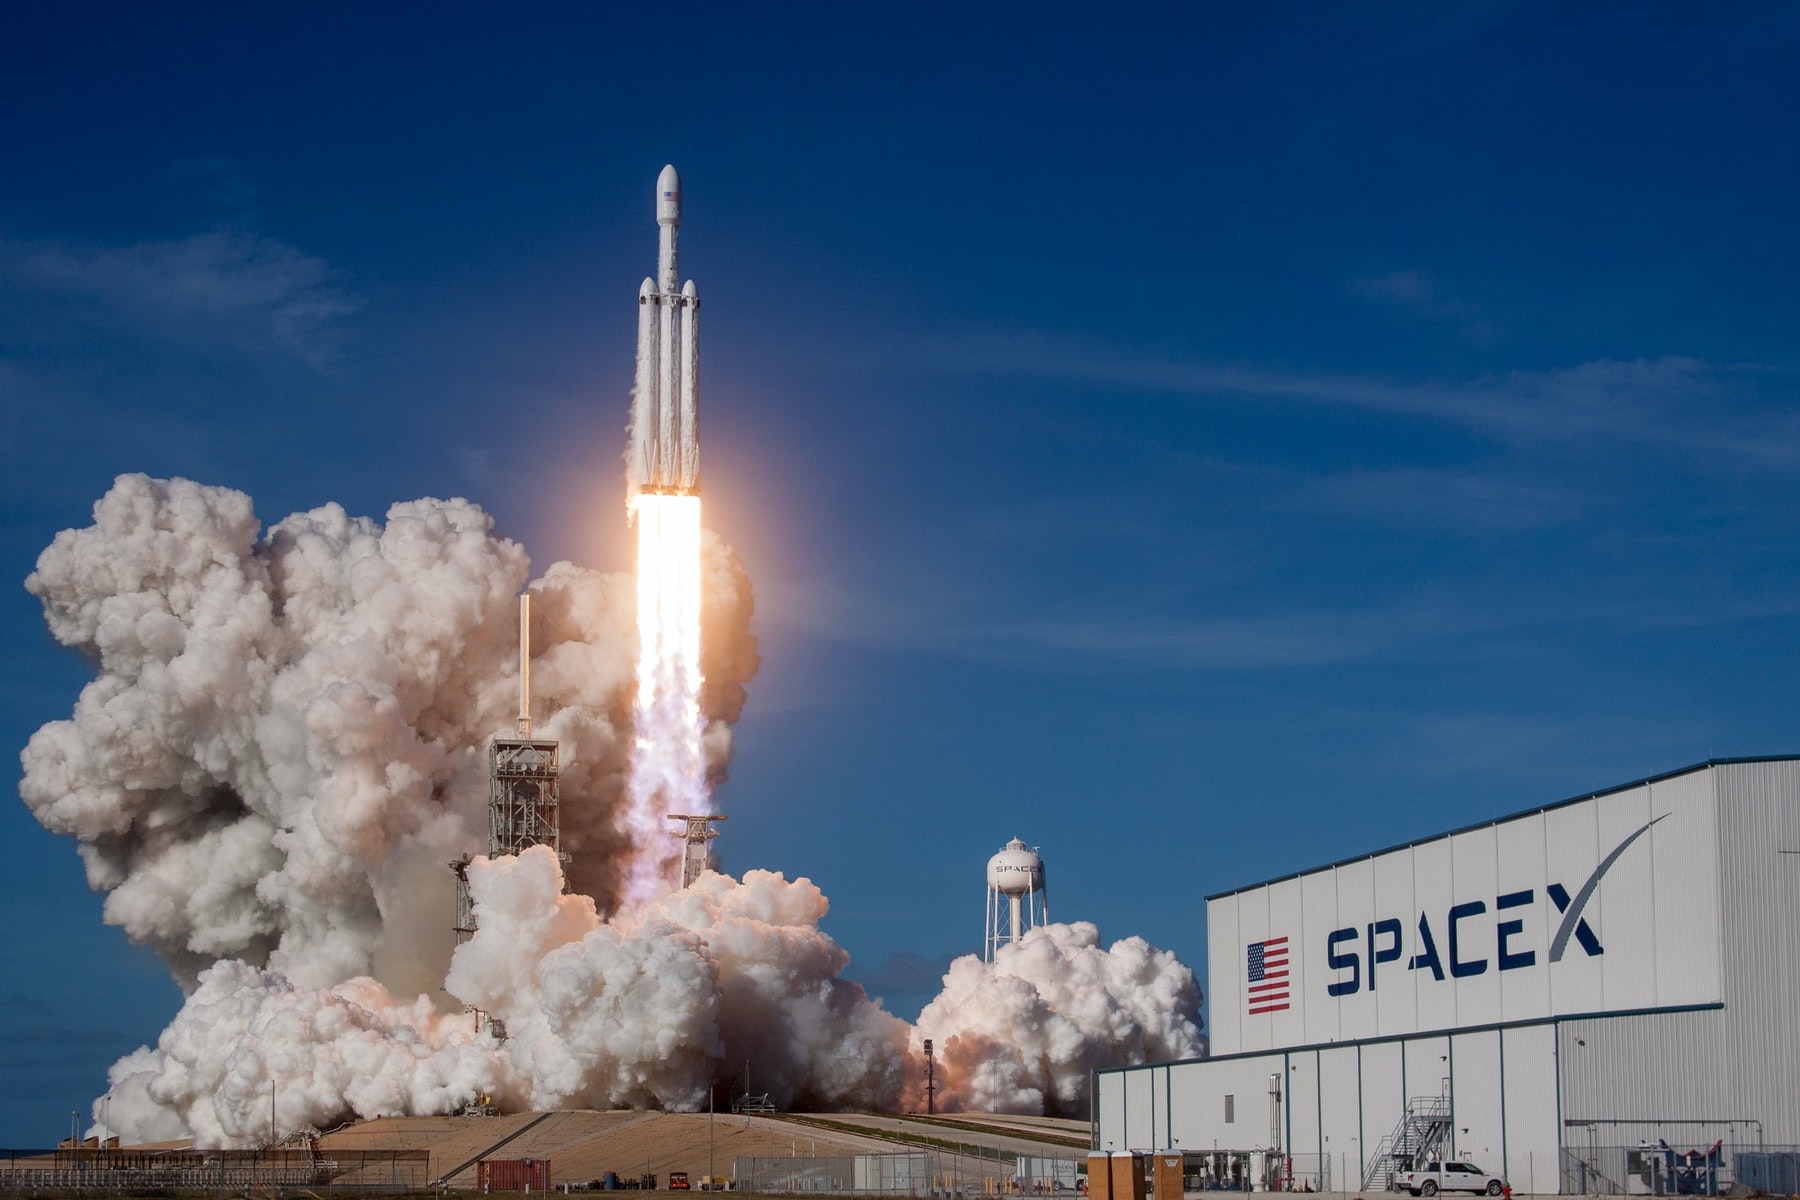 SpaceX rocket taking off for an article about private space programs.